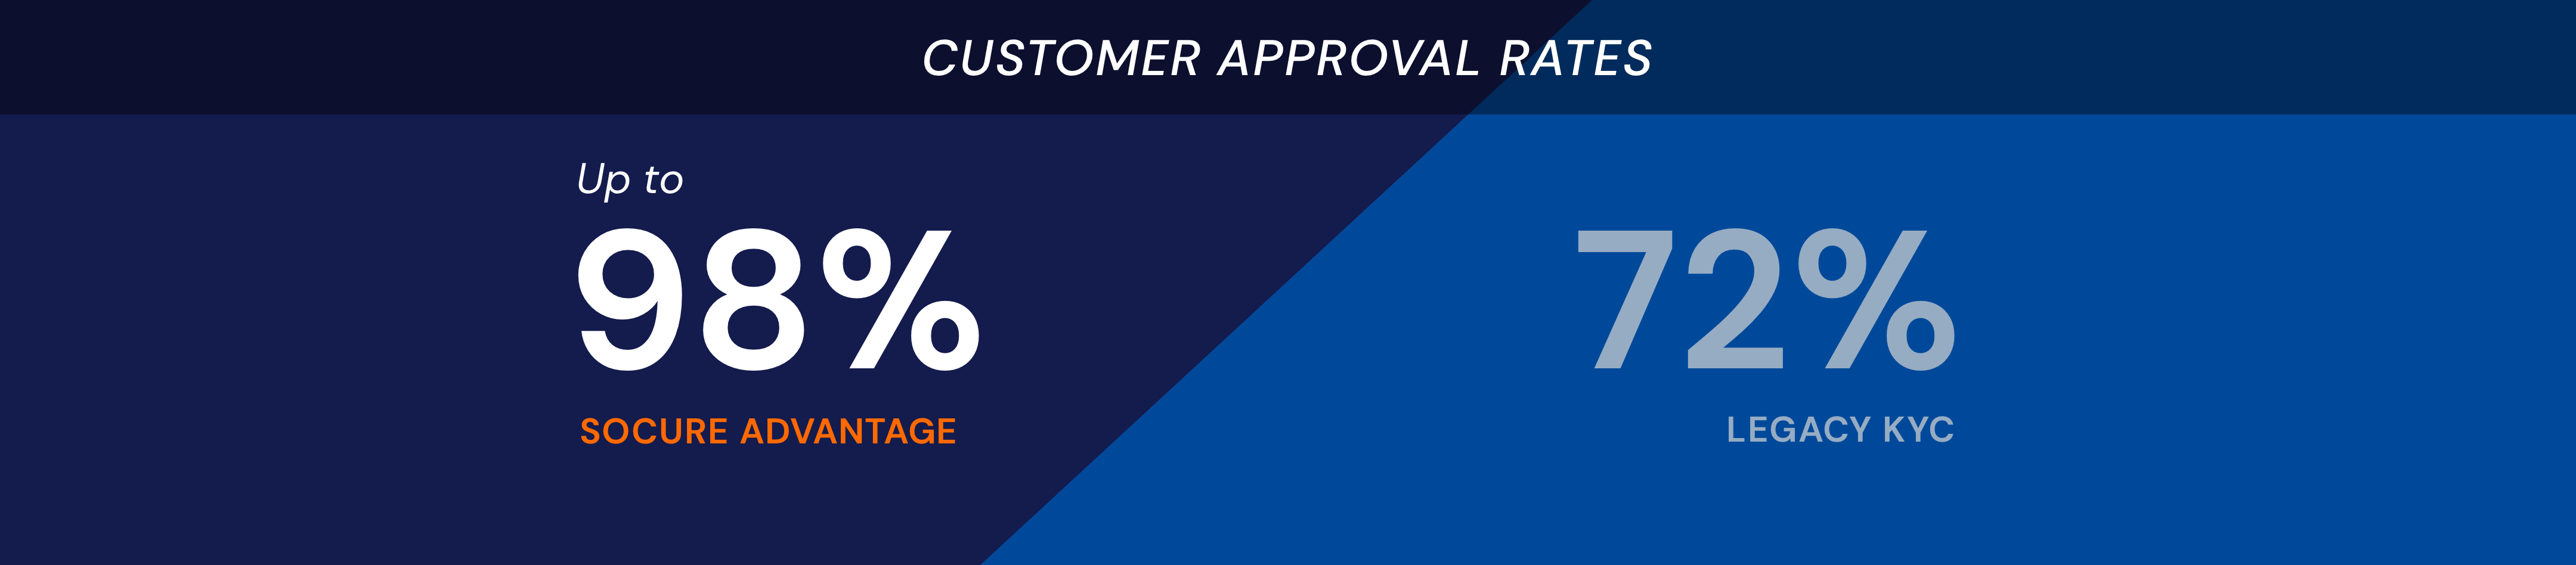 1_Customer Approval Rates@3x-3